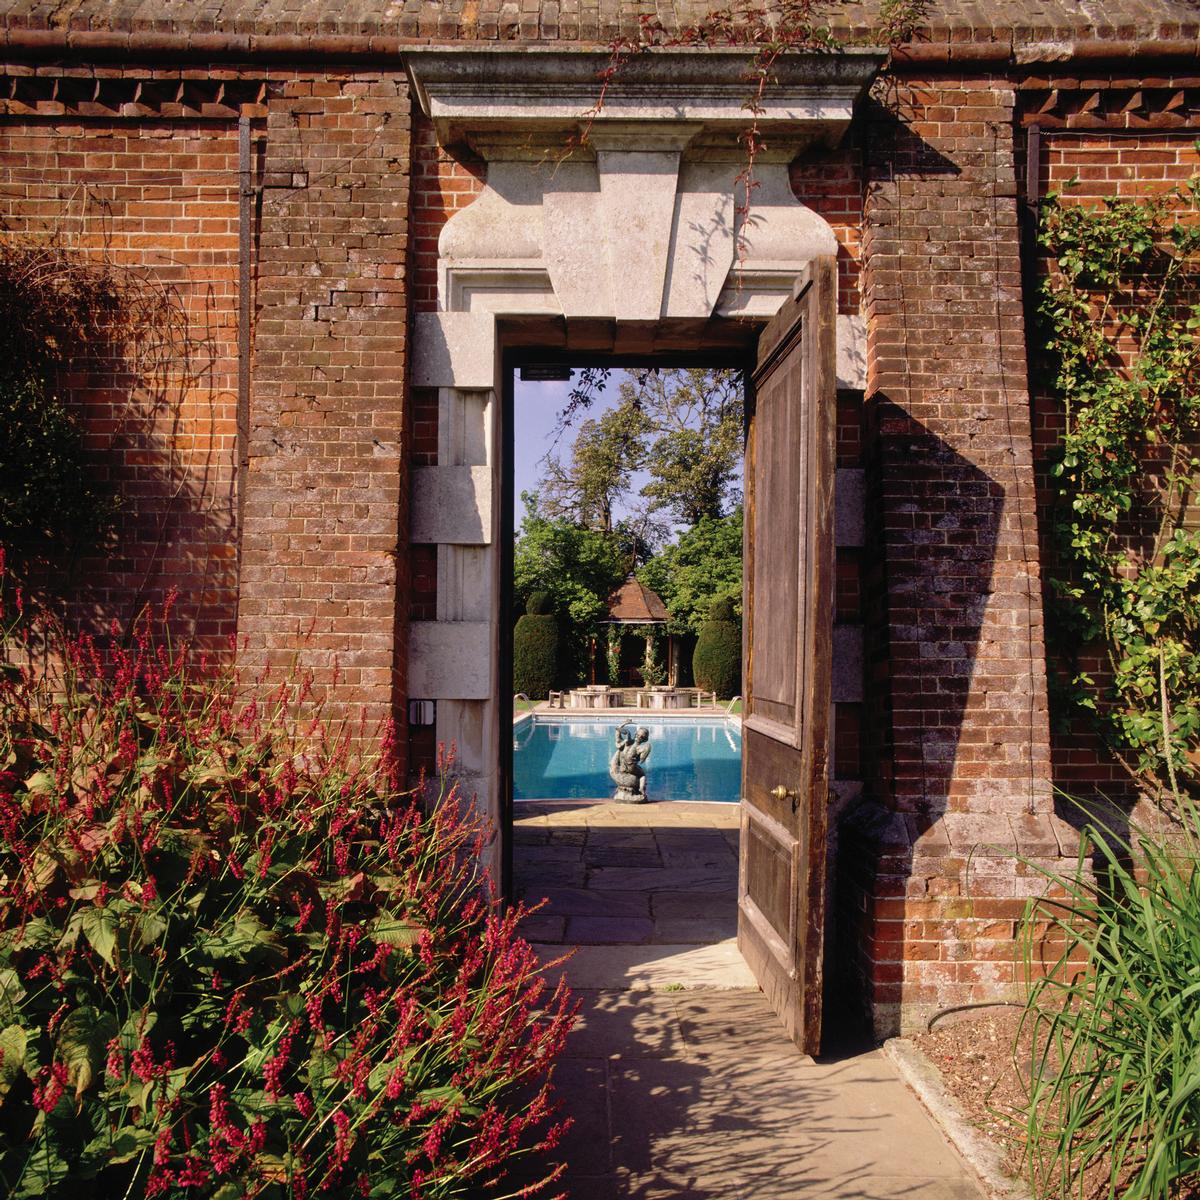 The entrance to the spa and Hatherley Manor's famous walled garden / 